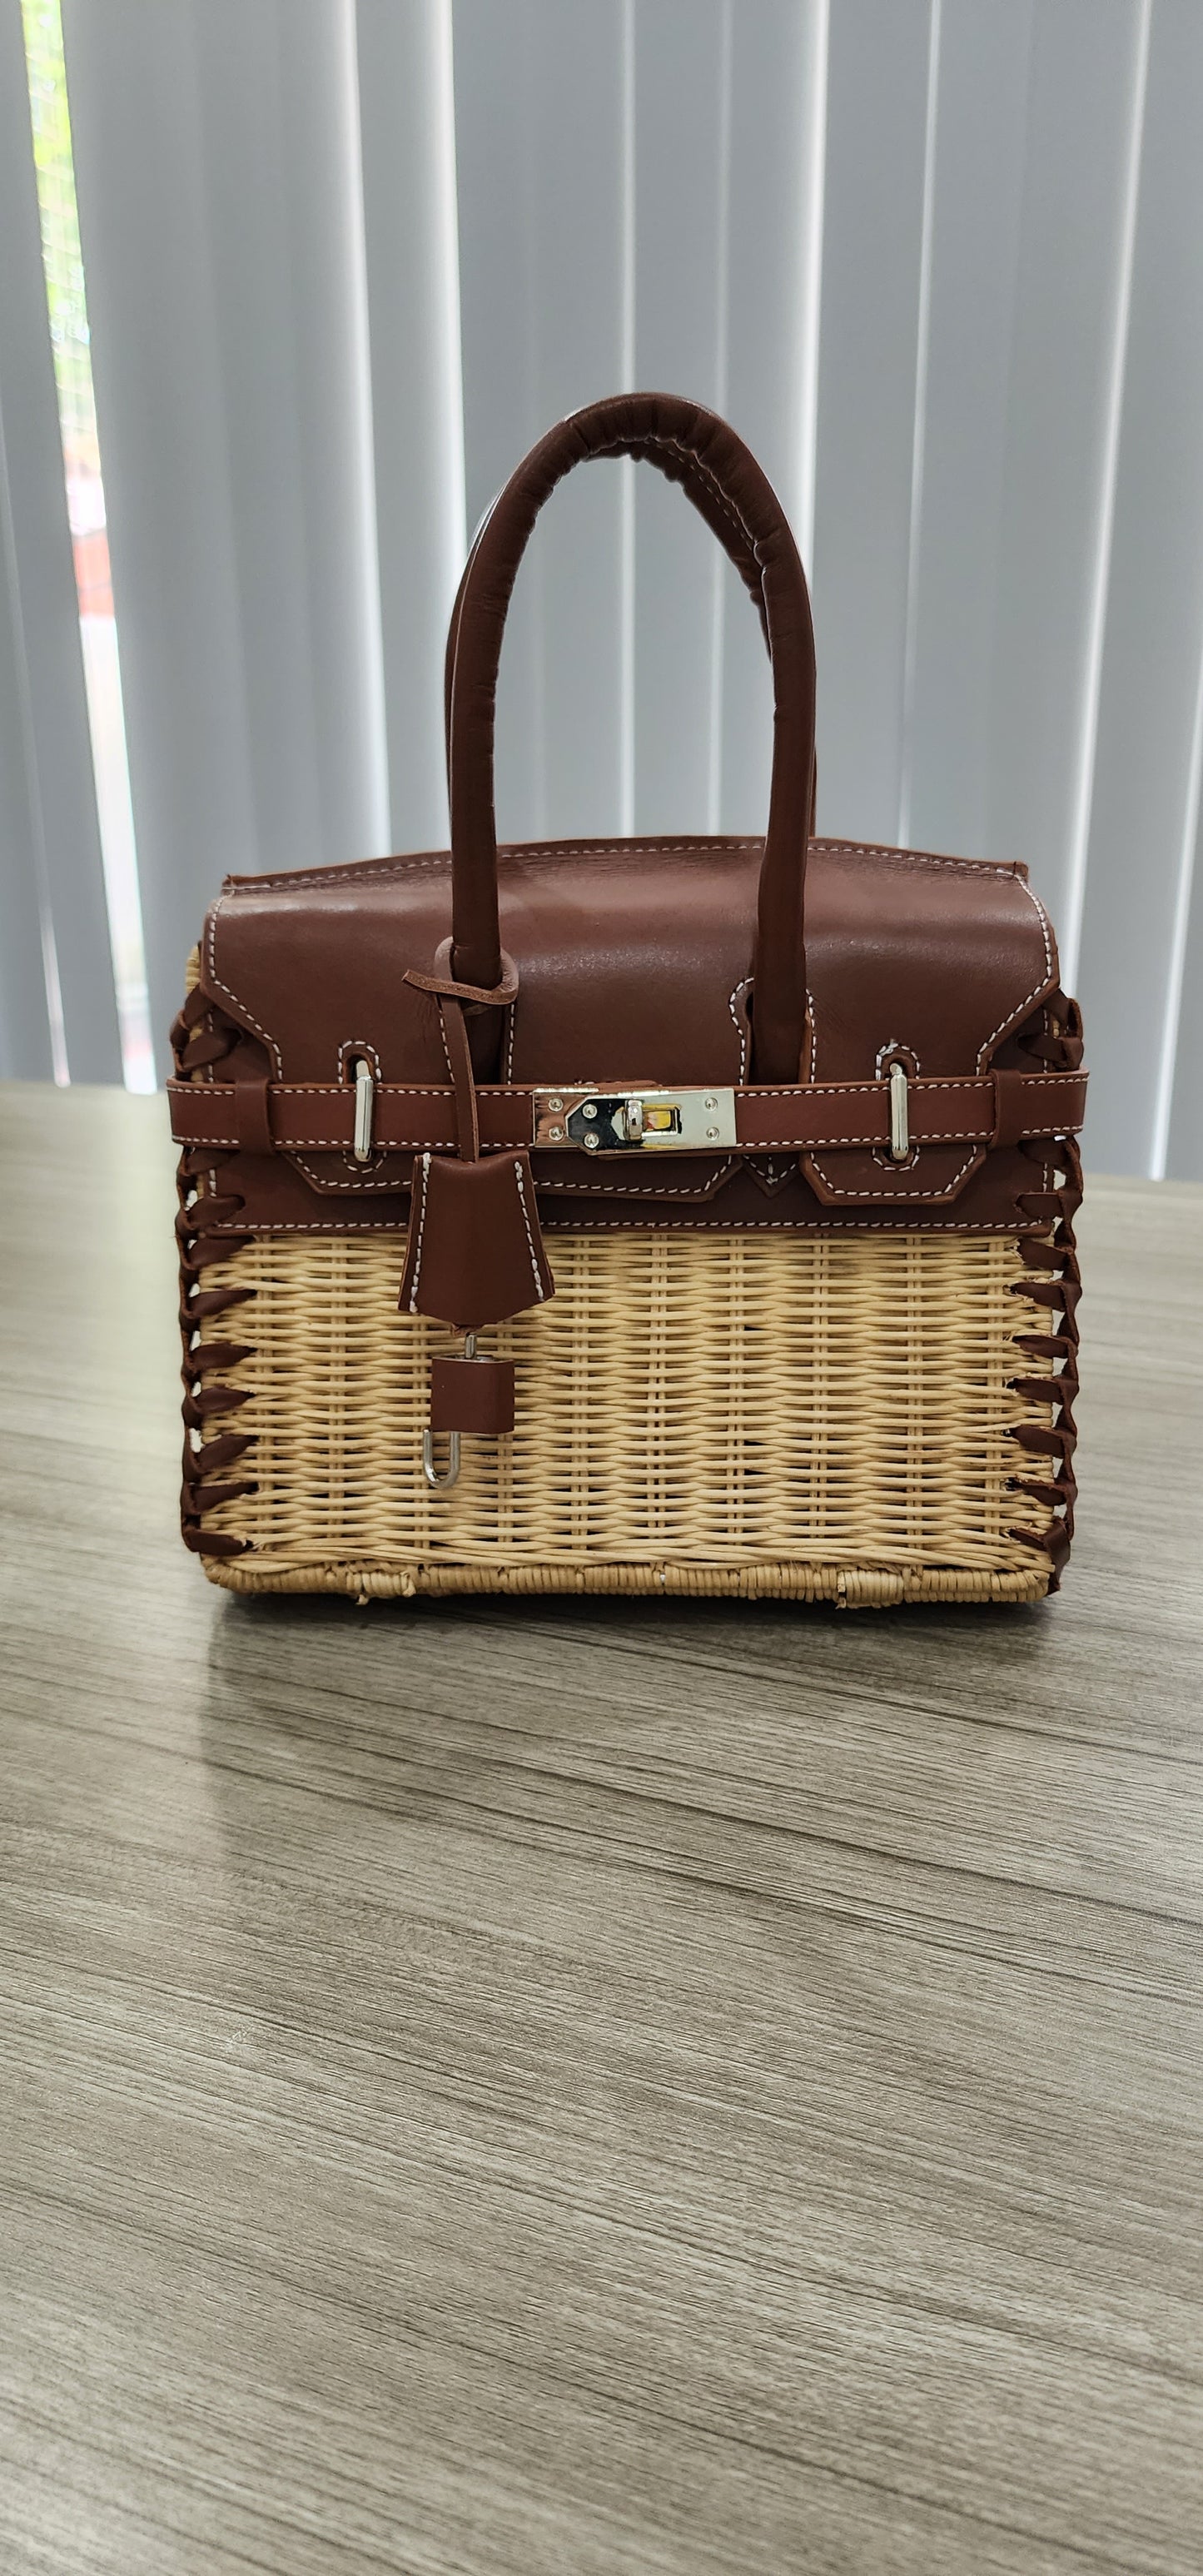 CLEARANCE SALE ! Brown genuine leather - Handmade wicker bag, Small size (25cm)